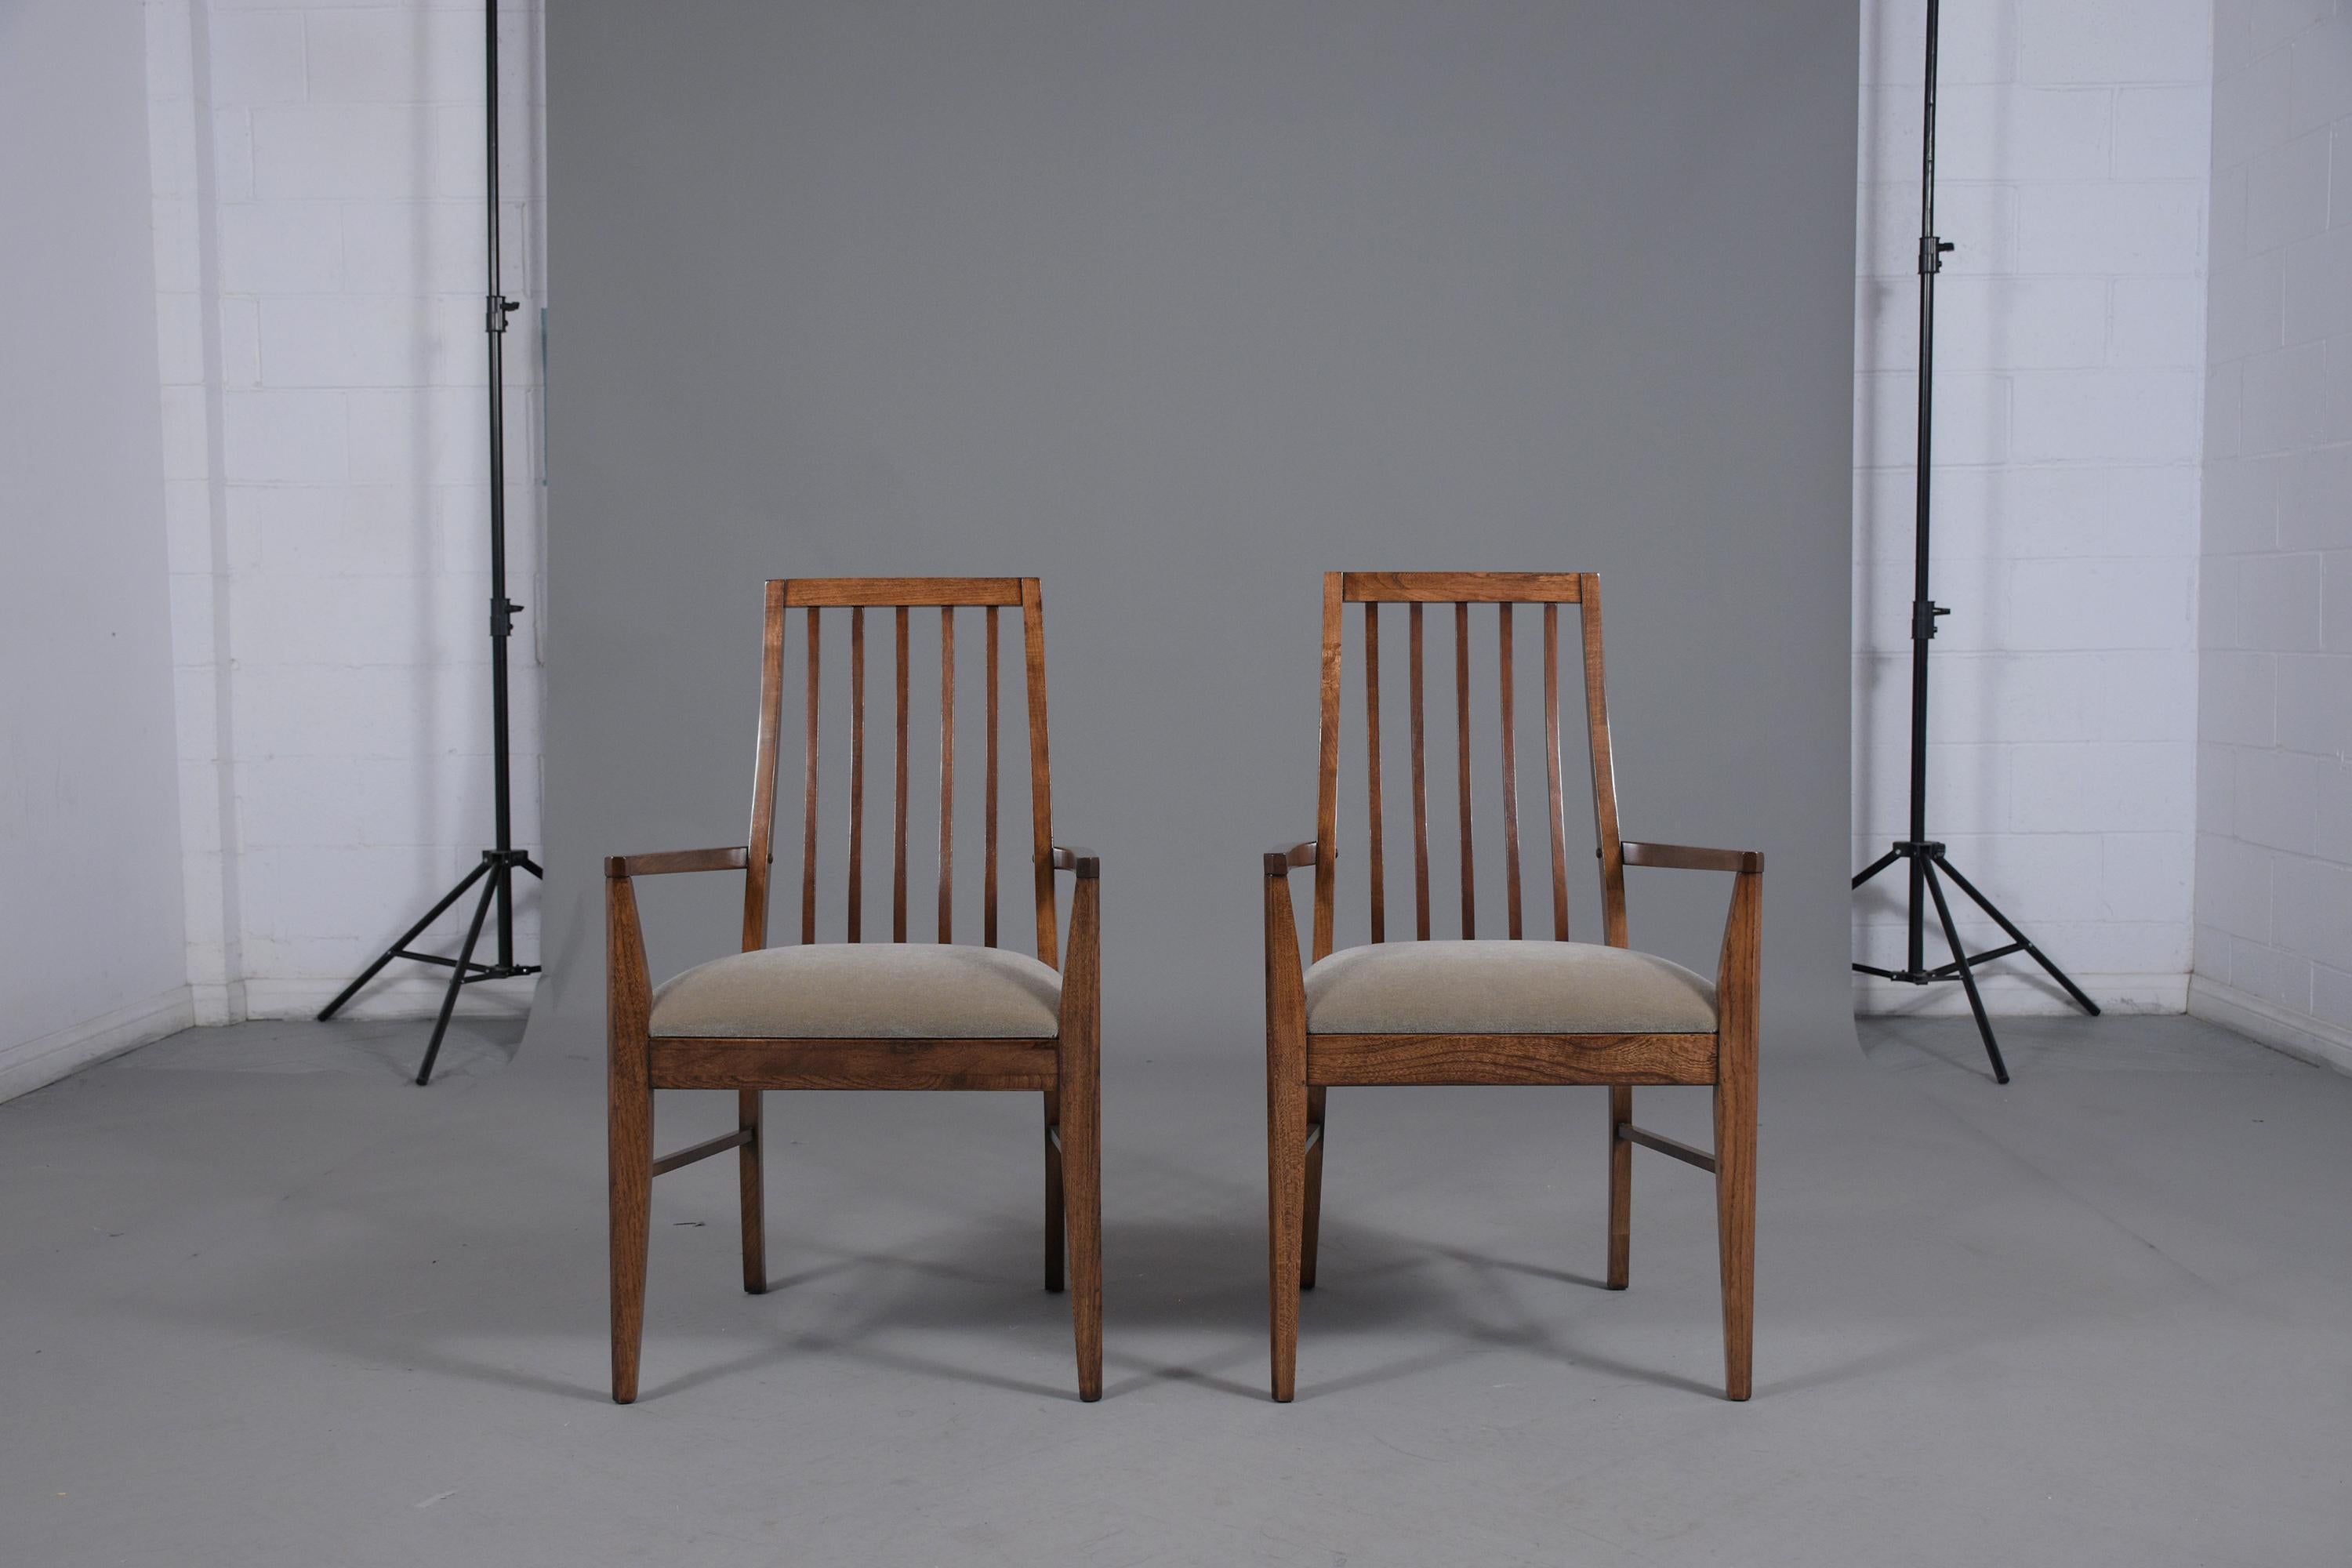 Step back into the 1960s with our vintage pair of mid-century modern armchairs, a perfect representation of the era's celebrated design and craftsmanship. Handcrafted from walnut wood, these chairs have been given a new lease on life with a fresh